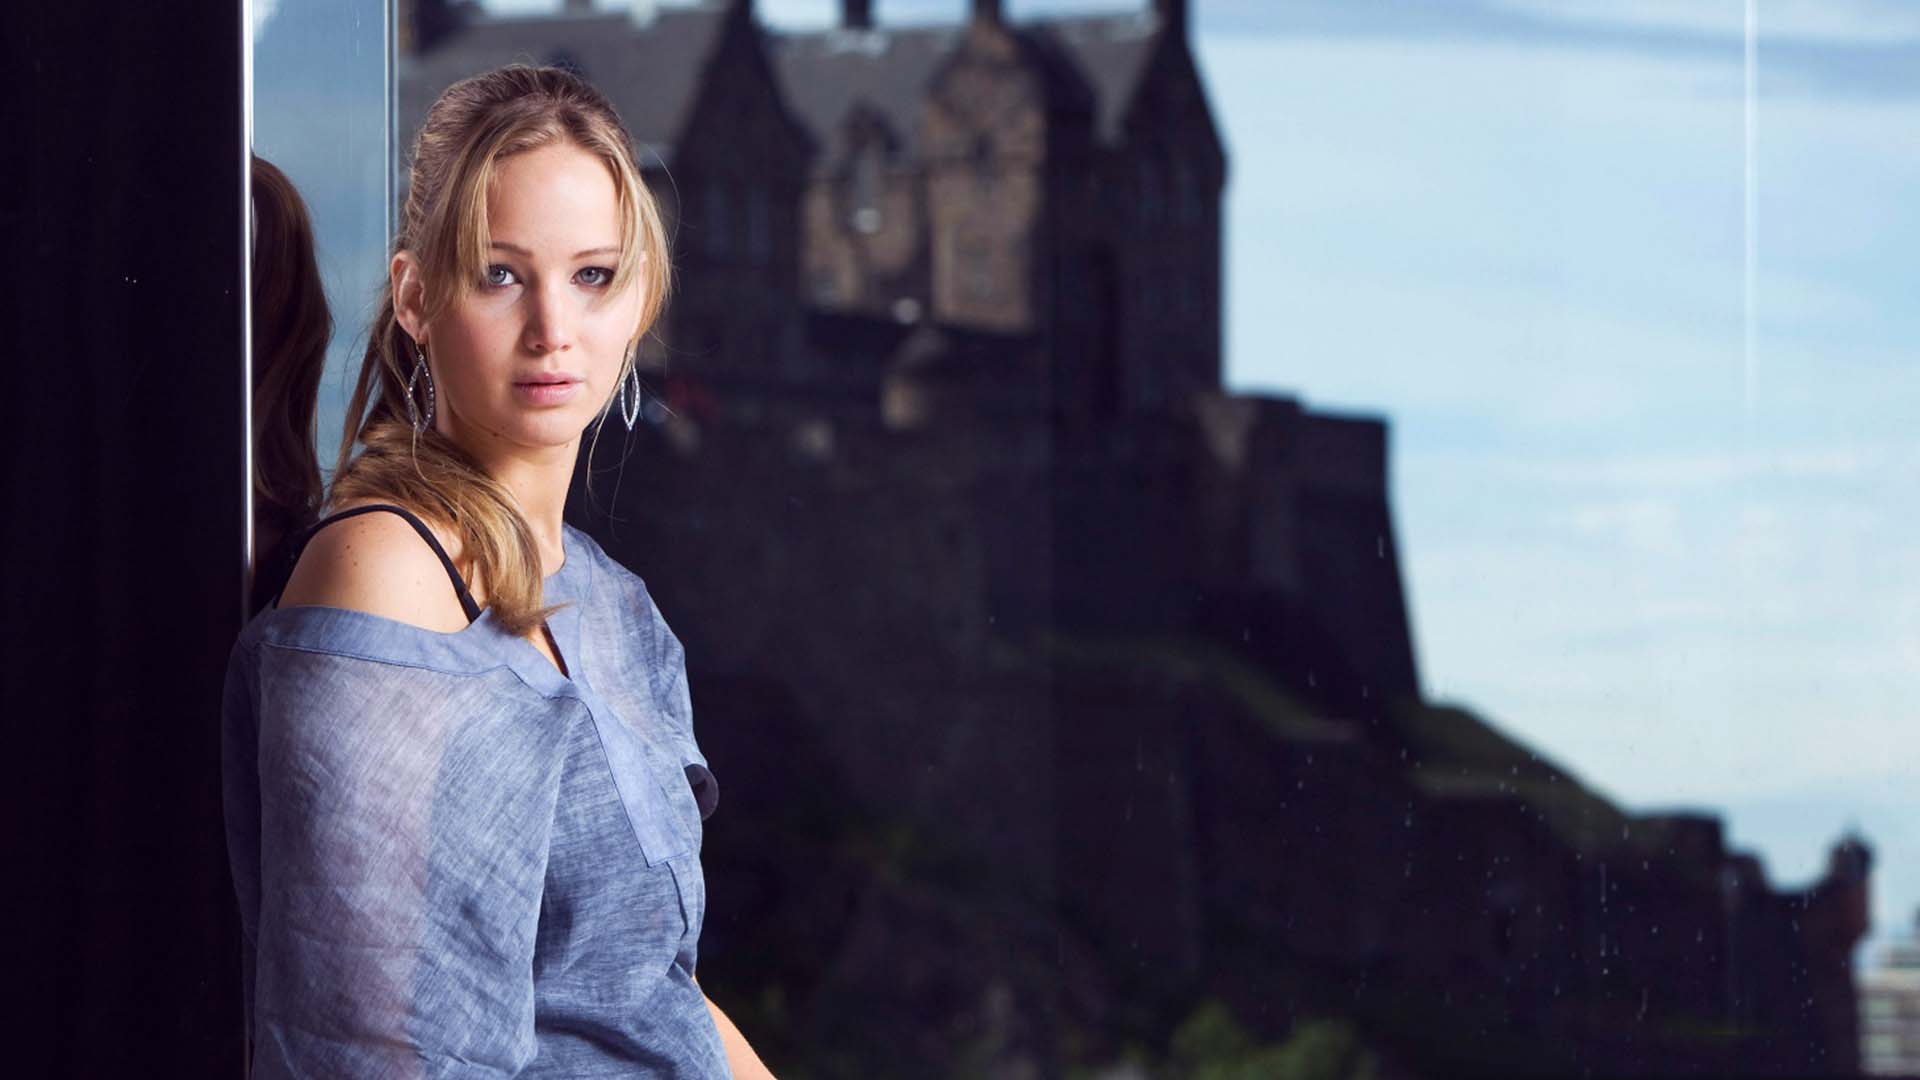 Free High Definition Mind Blowing Jennifer Lawrence Scenery Download